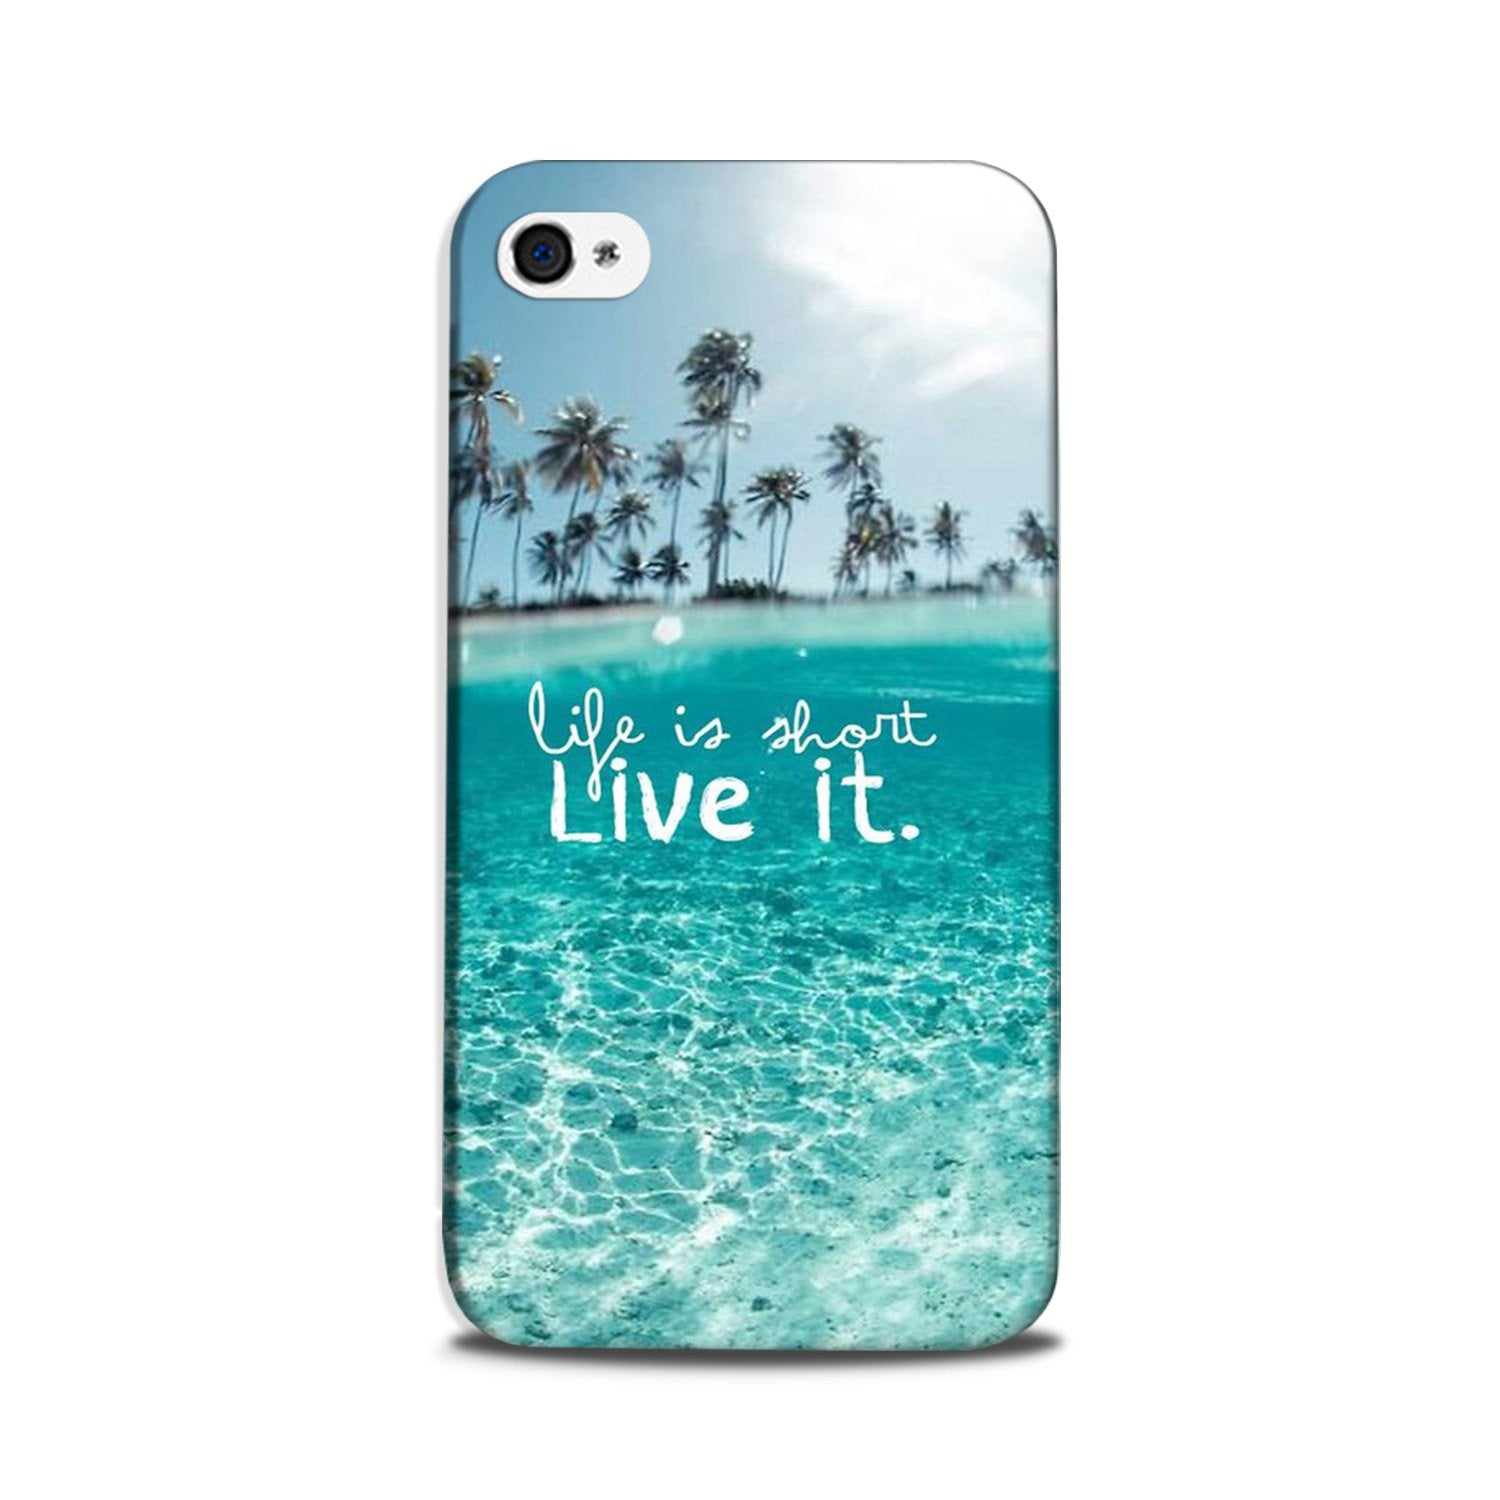 Life is short live it Case for iPhone 5/ 5s